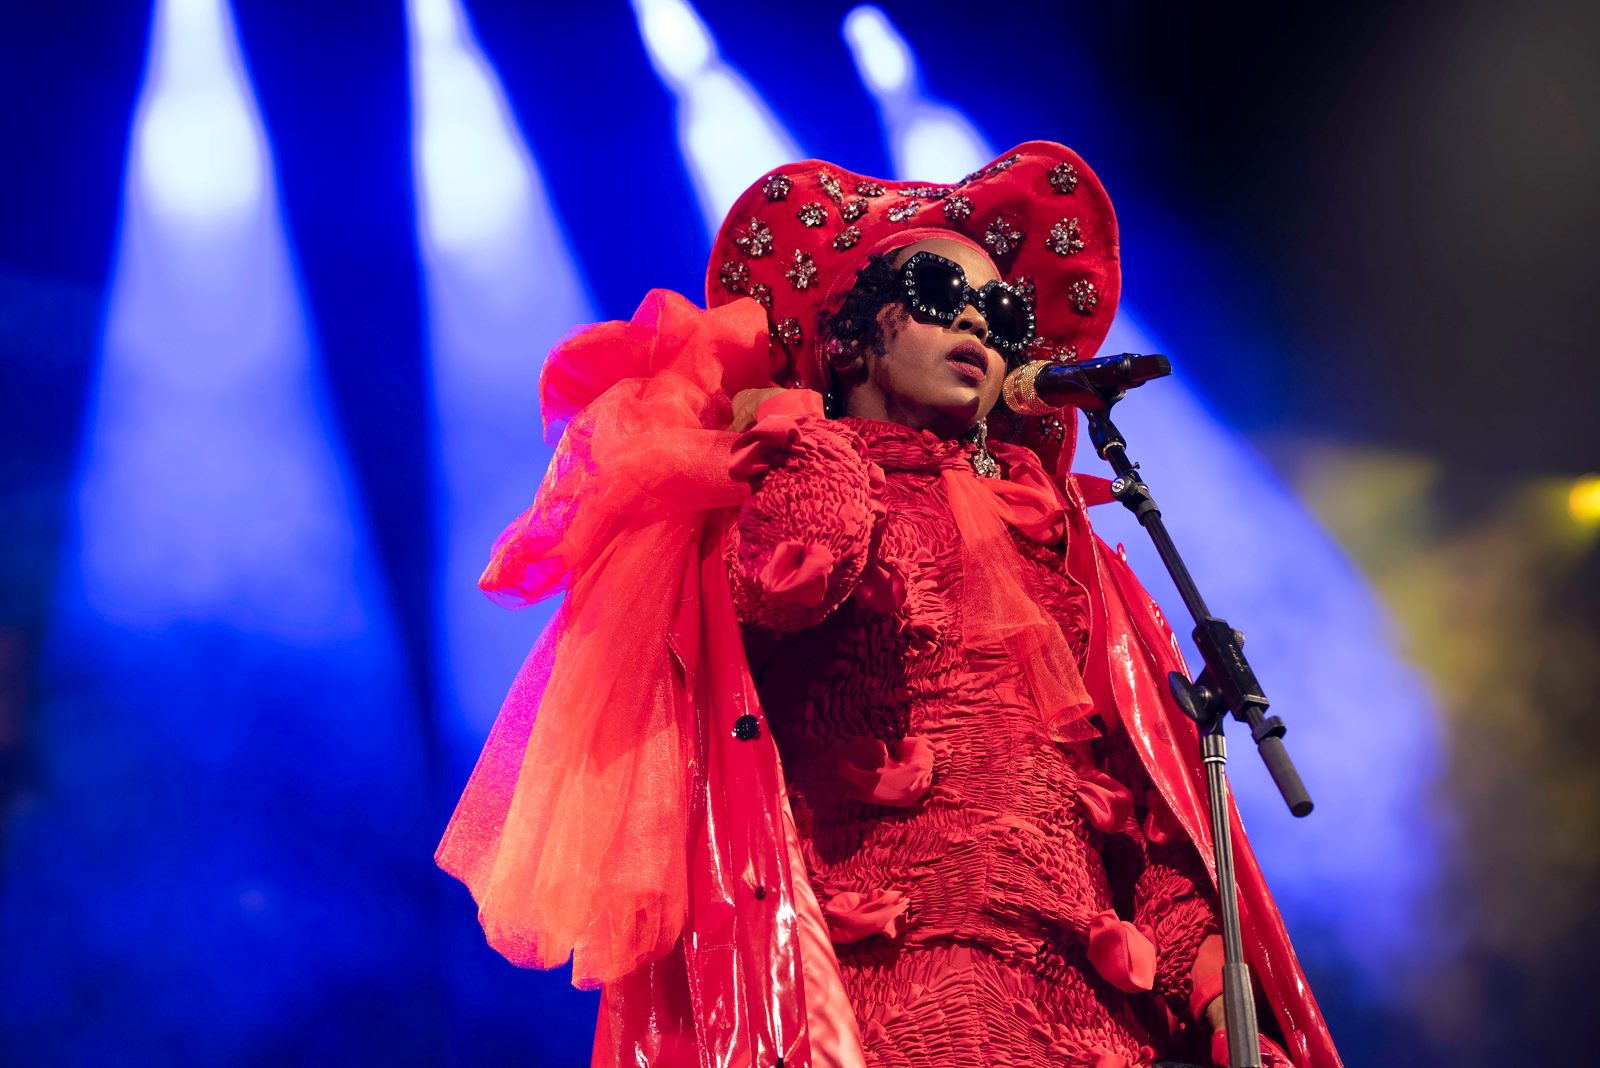 Lauryn Hill Postpones Remaining 2023 Tour Dates To 2024 Due To Ongoing